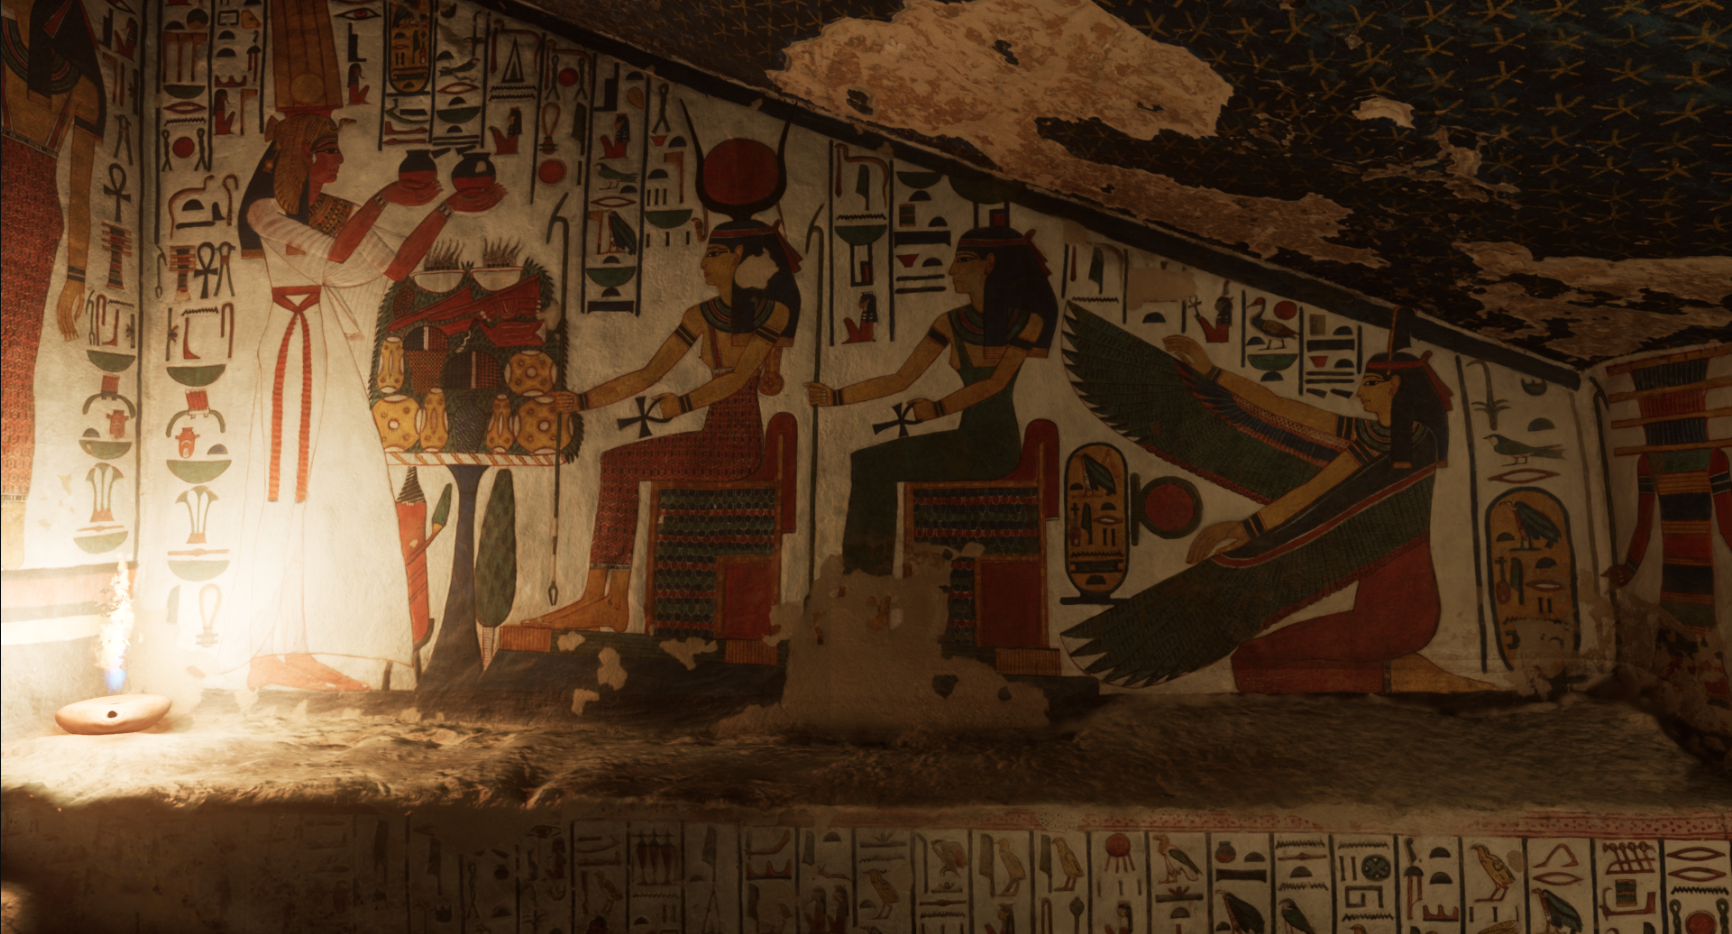 Tour an Ancient Egyptian Tomb with Nefertari: Journey to Eternity